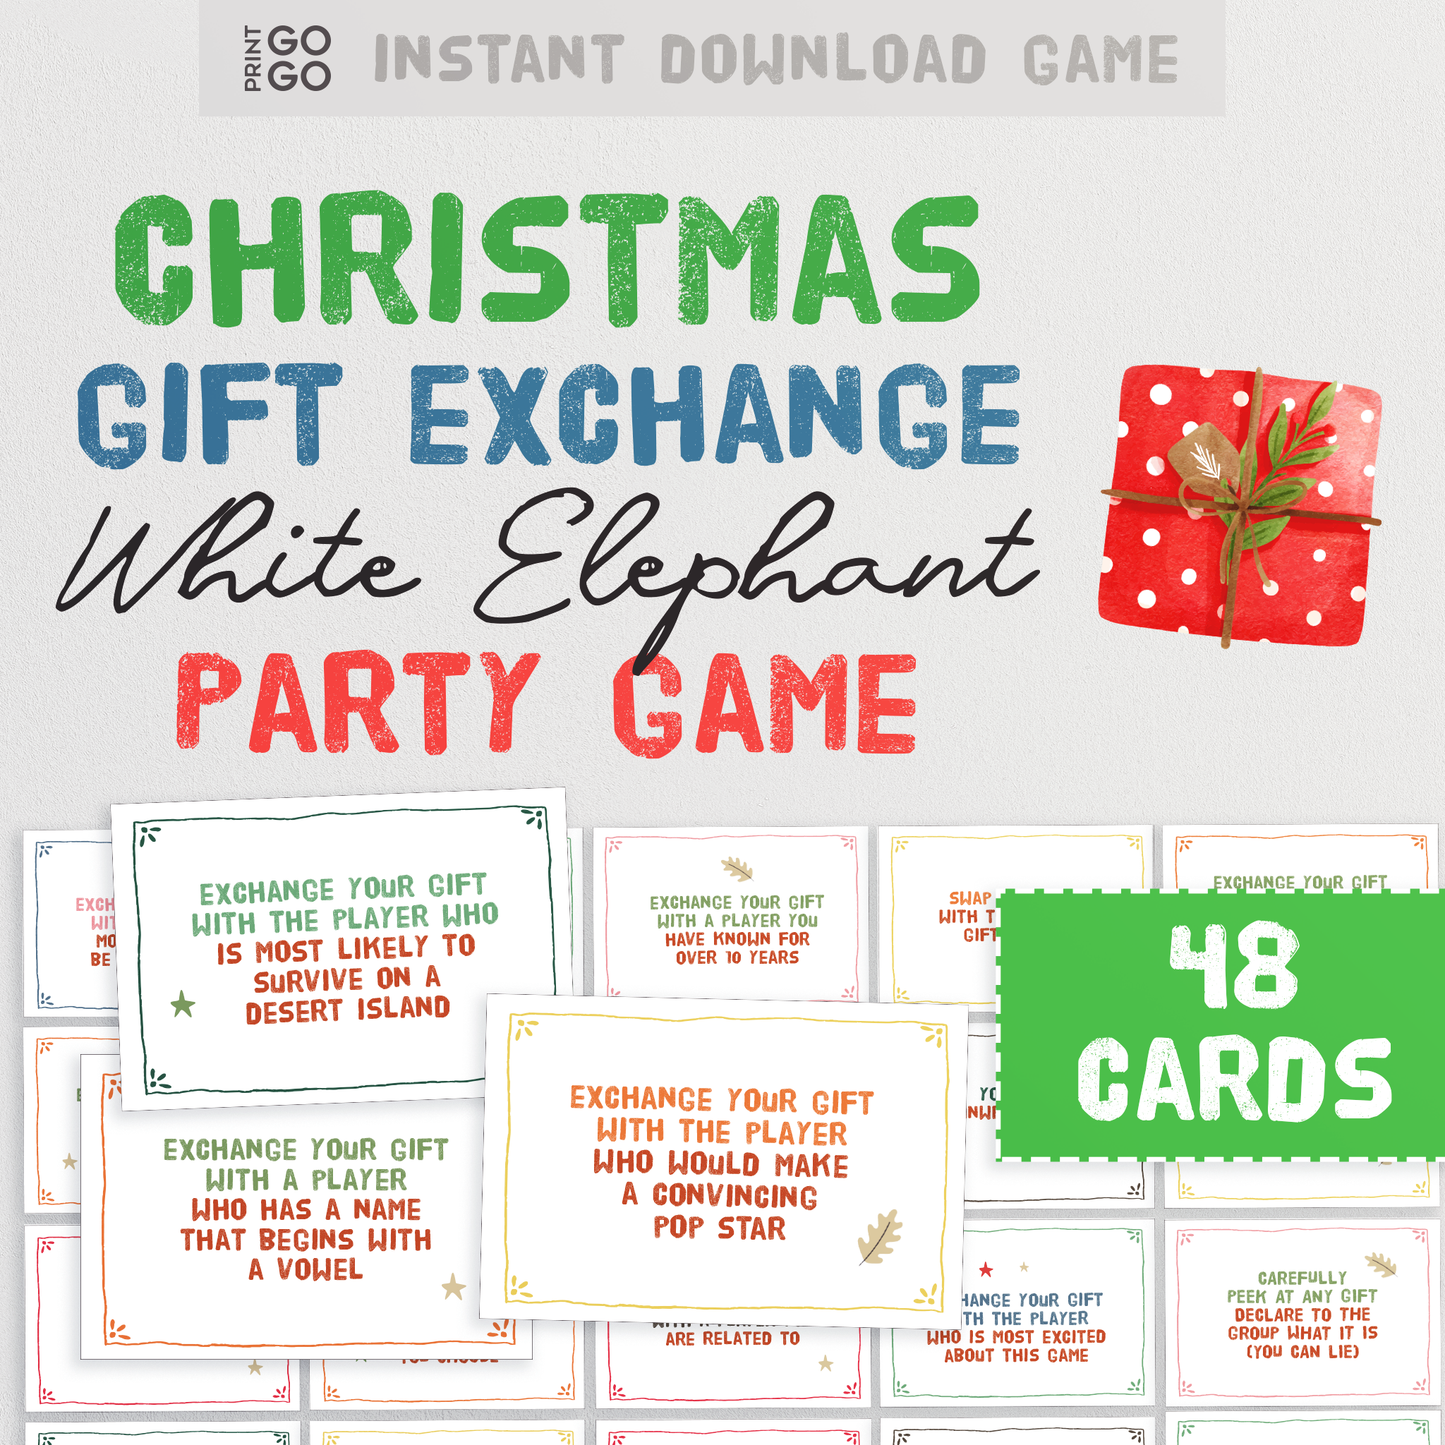 Christmas Gift Exchange Cards - The Hilarious White Elephant Party Game | Yankee Swap Gift Exchange Cards | Holiday Present Swap Party Game